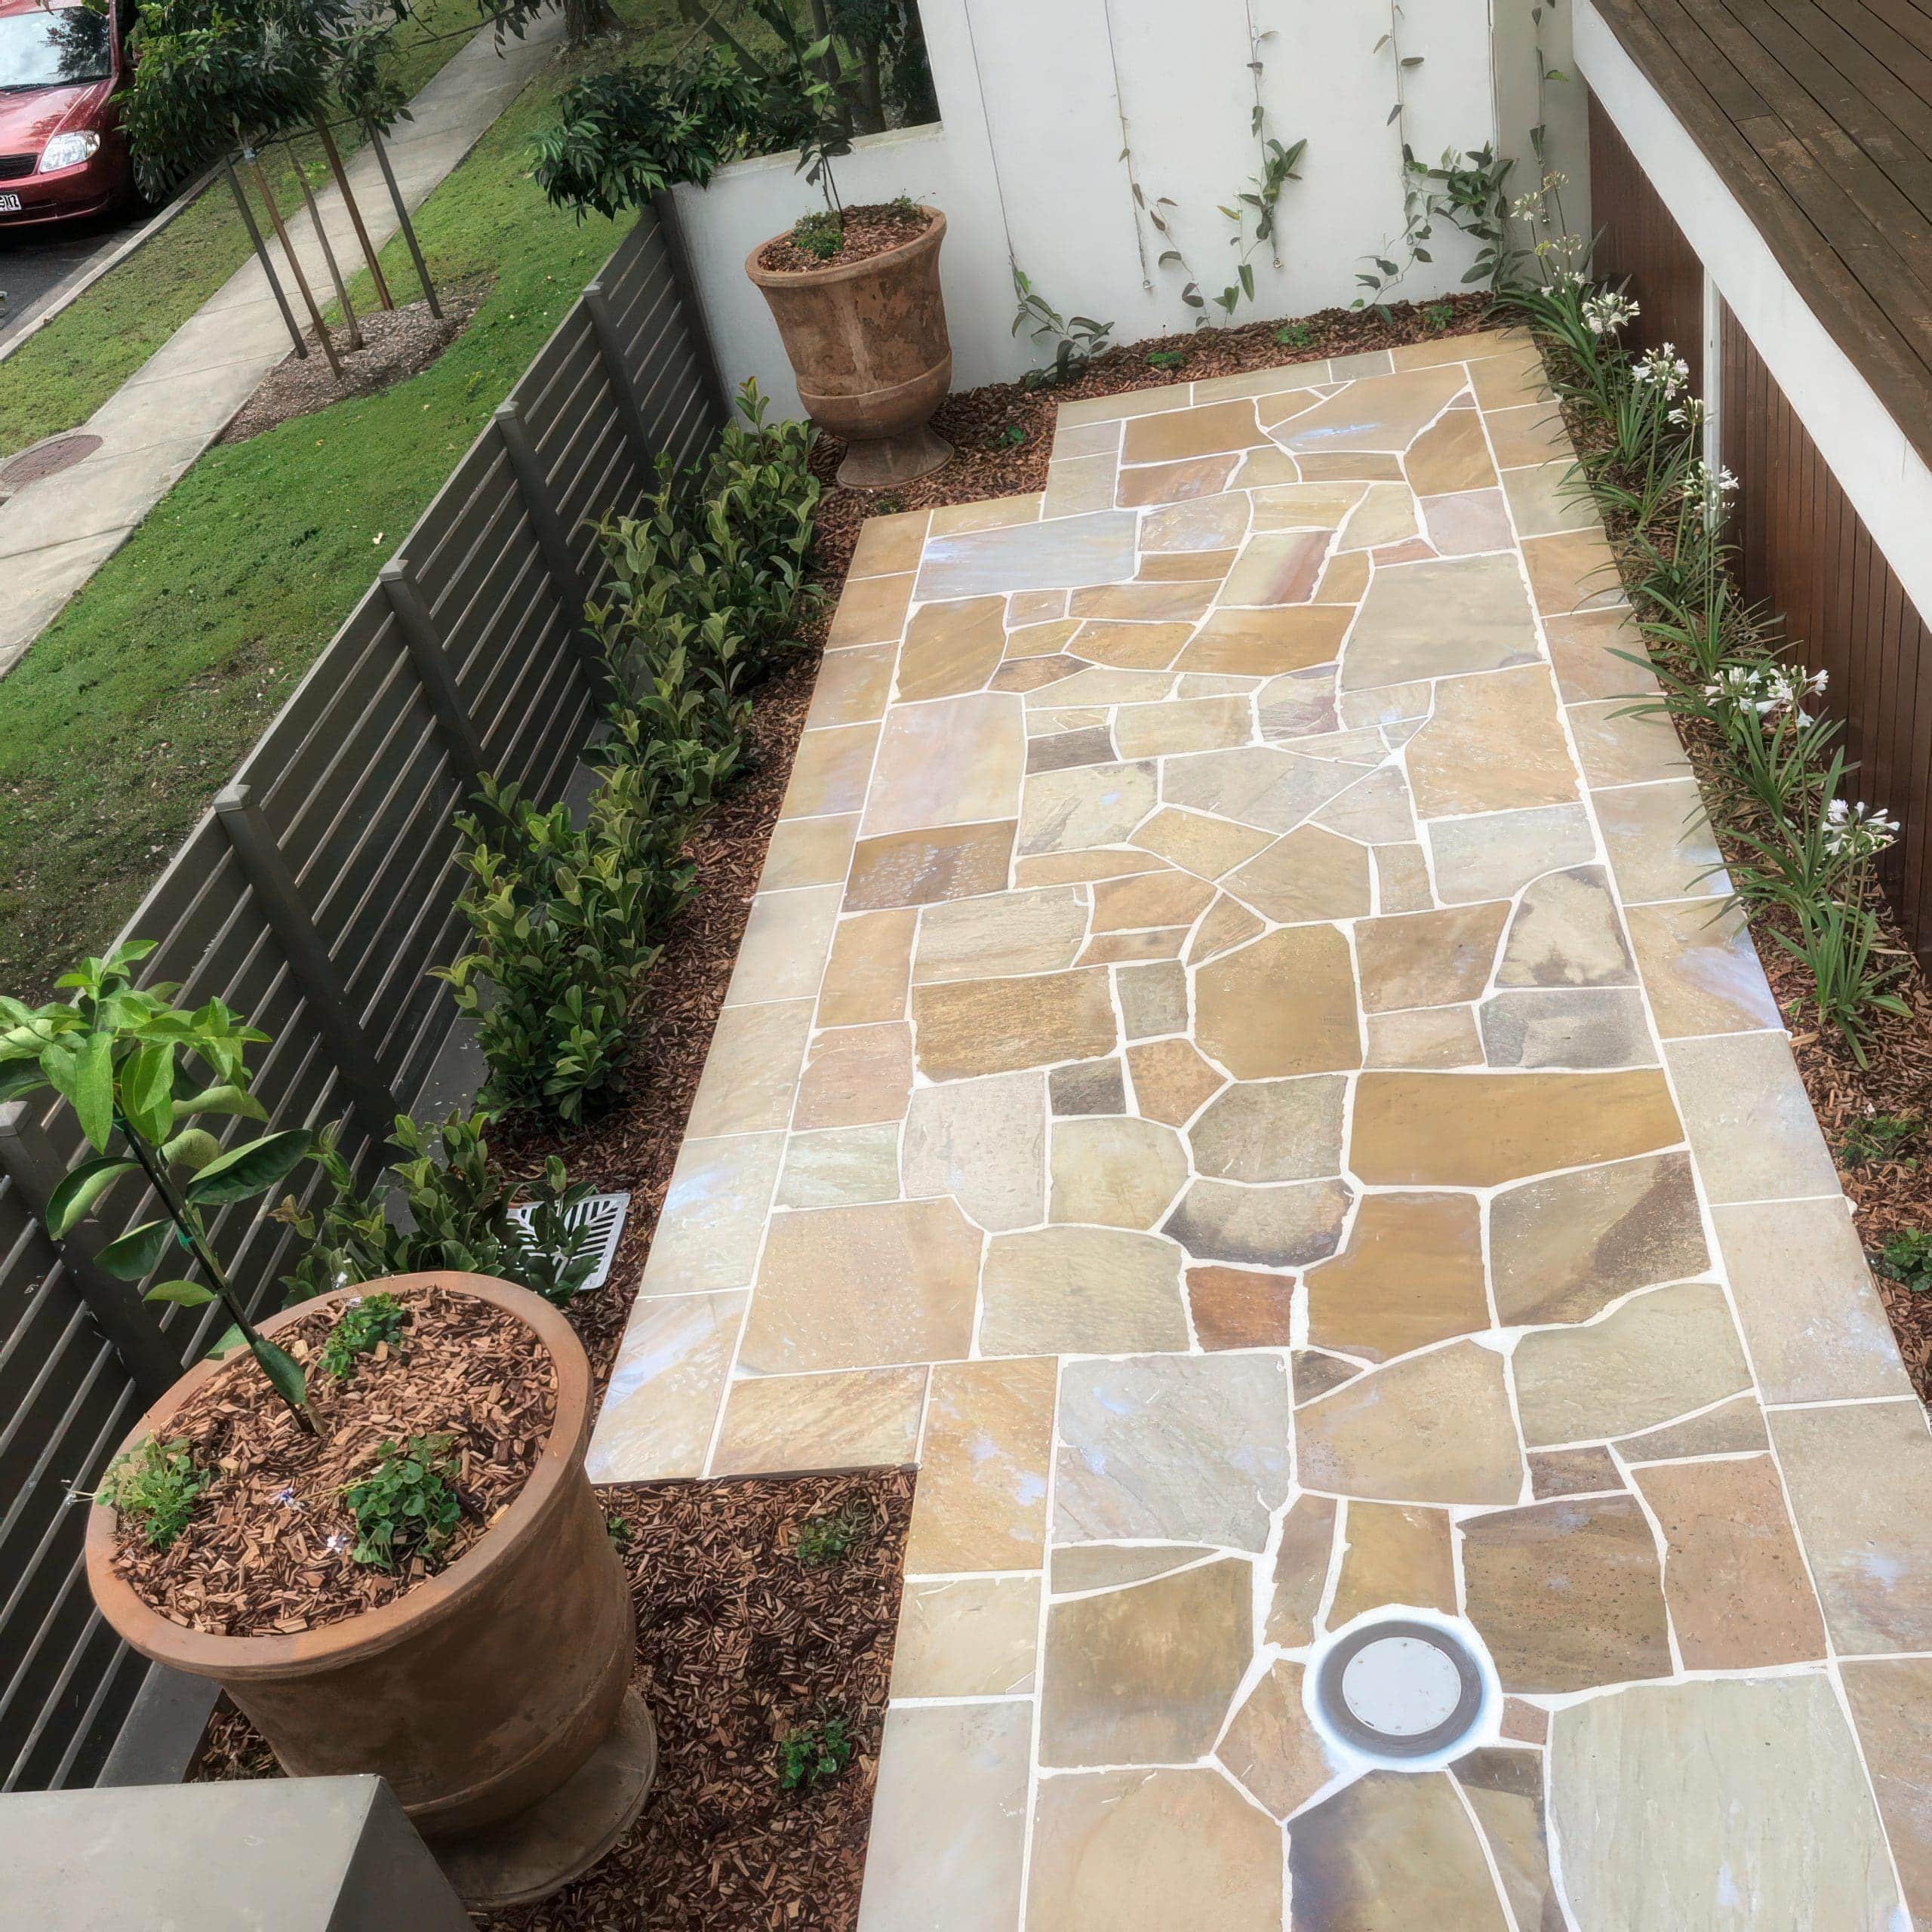 DESERT SAND SANDSTONE CRAZY PAVING_RMS TRADERS_NATURAL STONE PAVING FACADE PATHS SUPPLIER MELBOURNE (11)